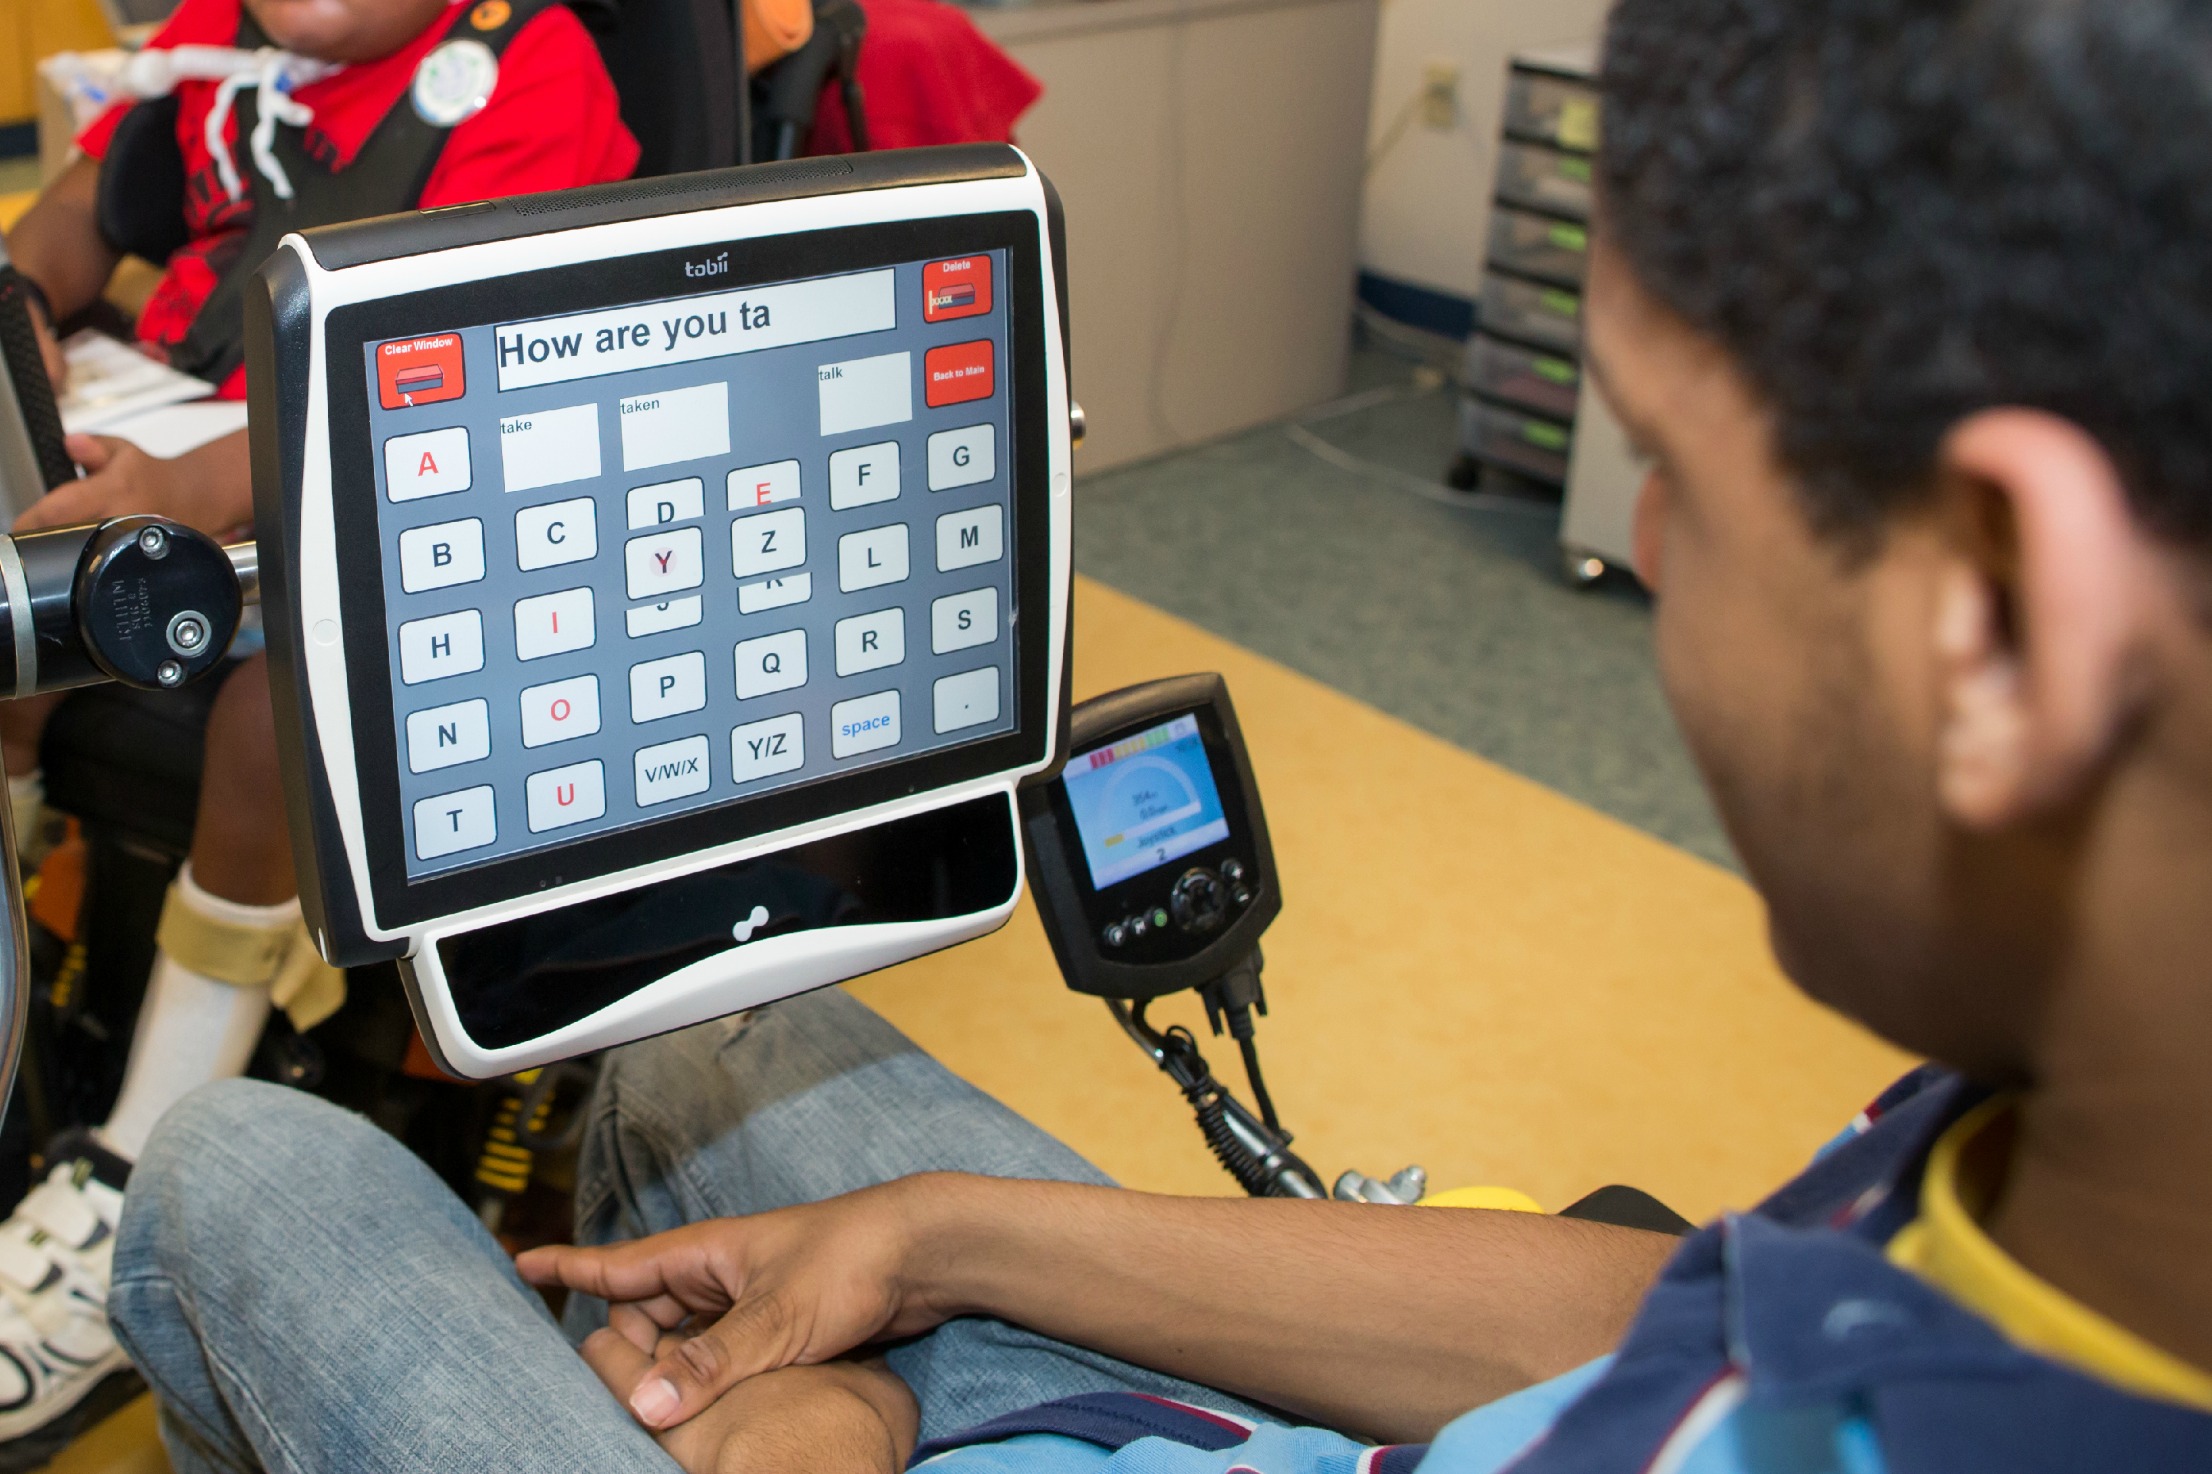 speech and language impairment assistive technology